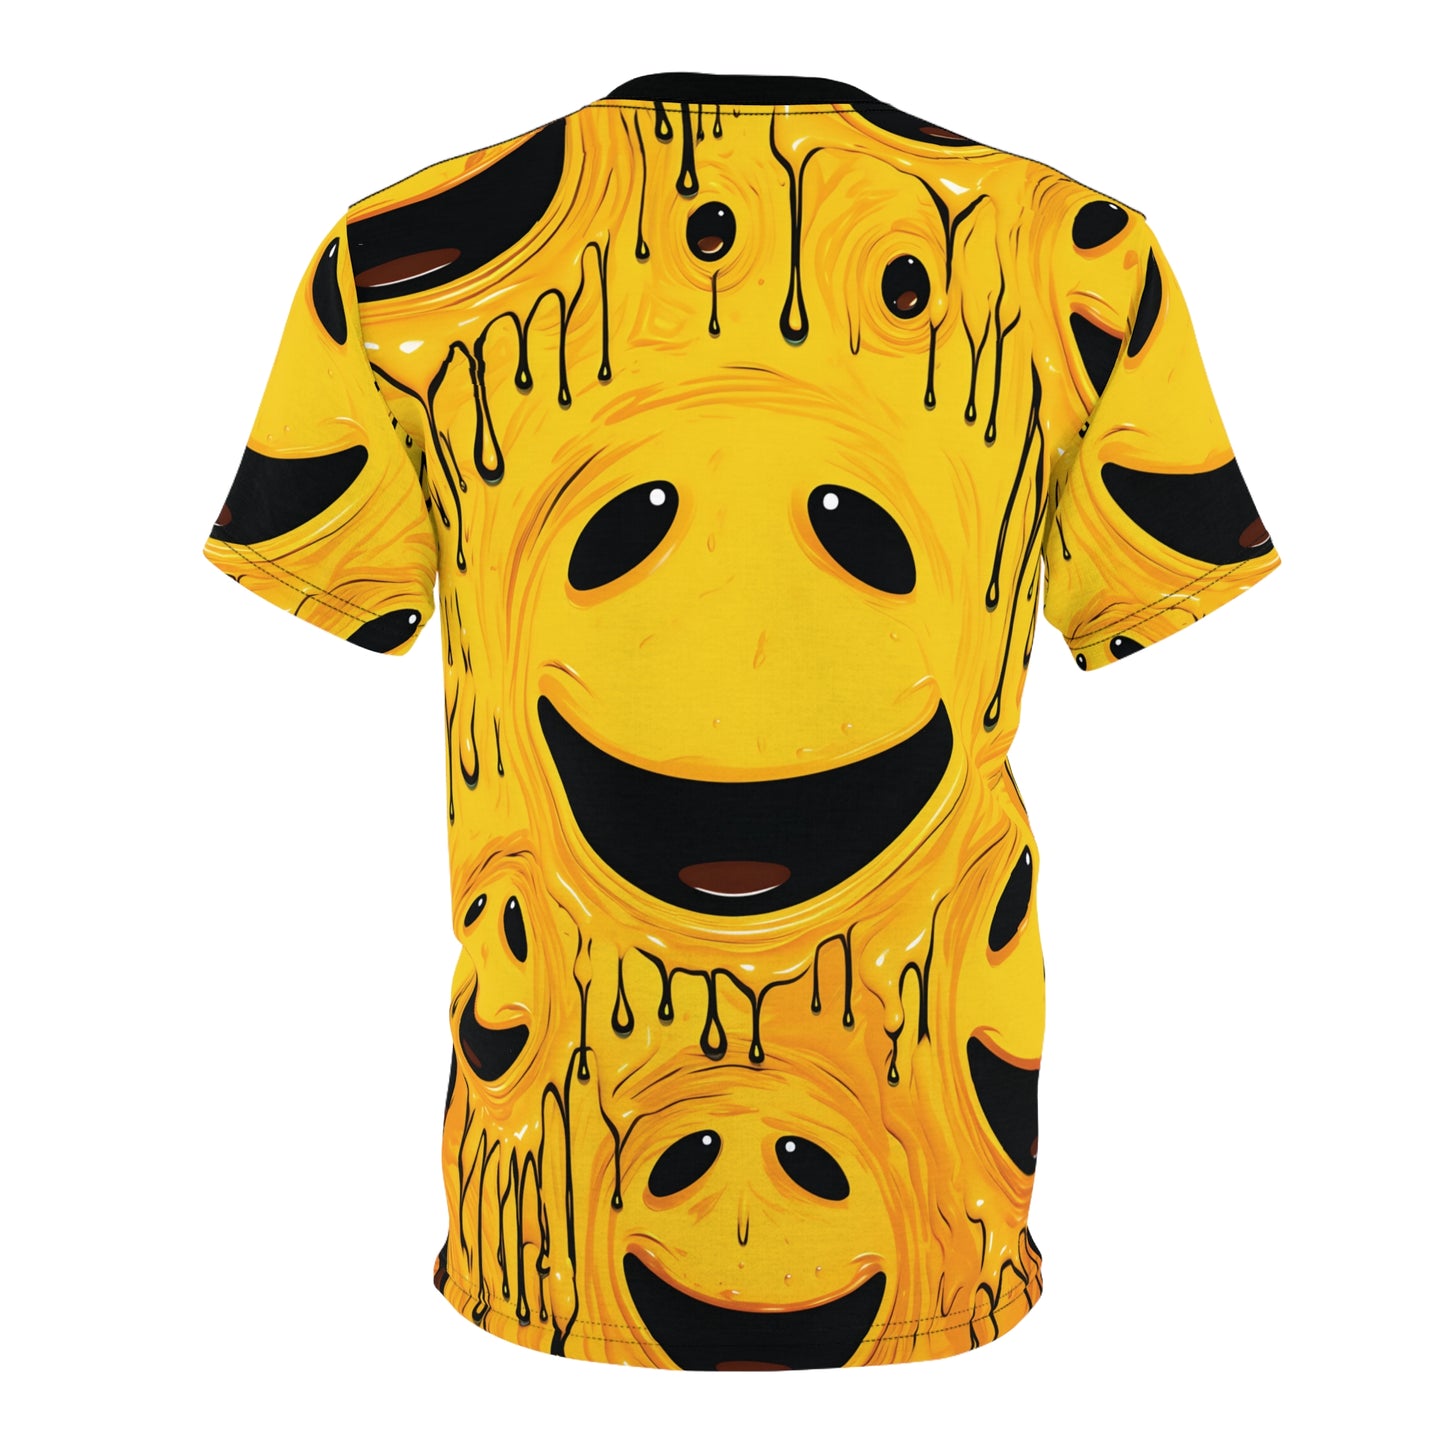 ALL THE SMILES | UNISEX AOP T-SHIRT